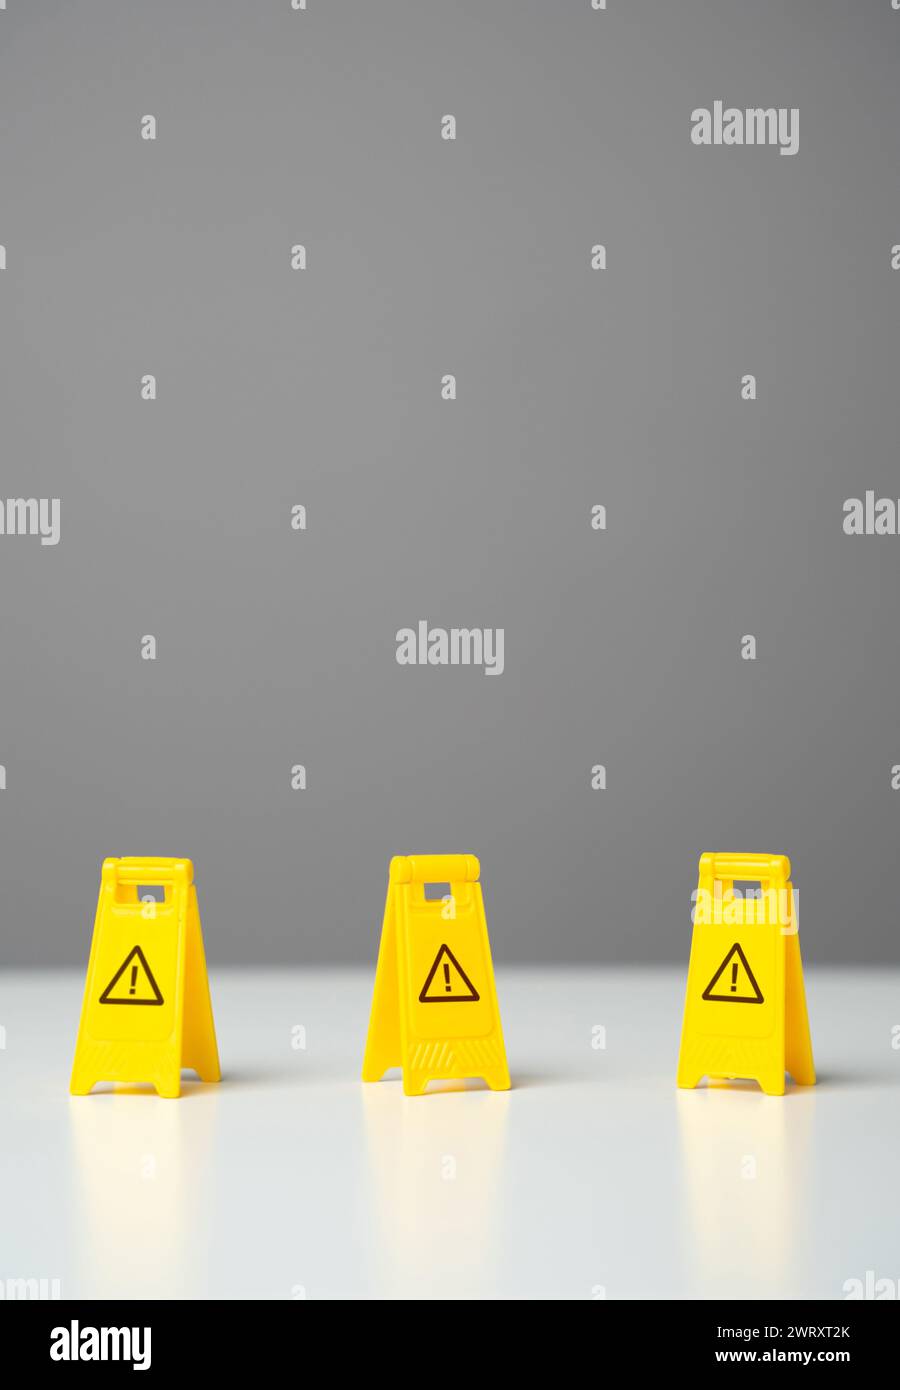 Perimeter warning signs. Be careful. No no zone. Overcome obstacles and forge ahead towards goals. Avoid trouble. Adaptability. Find a way through dan Stock Photo